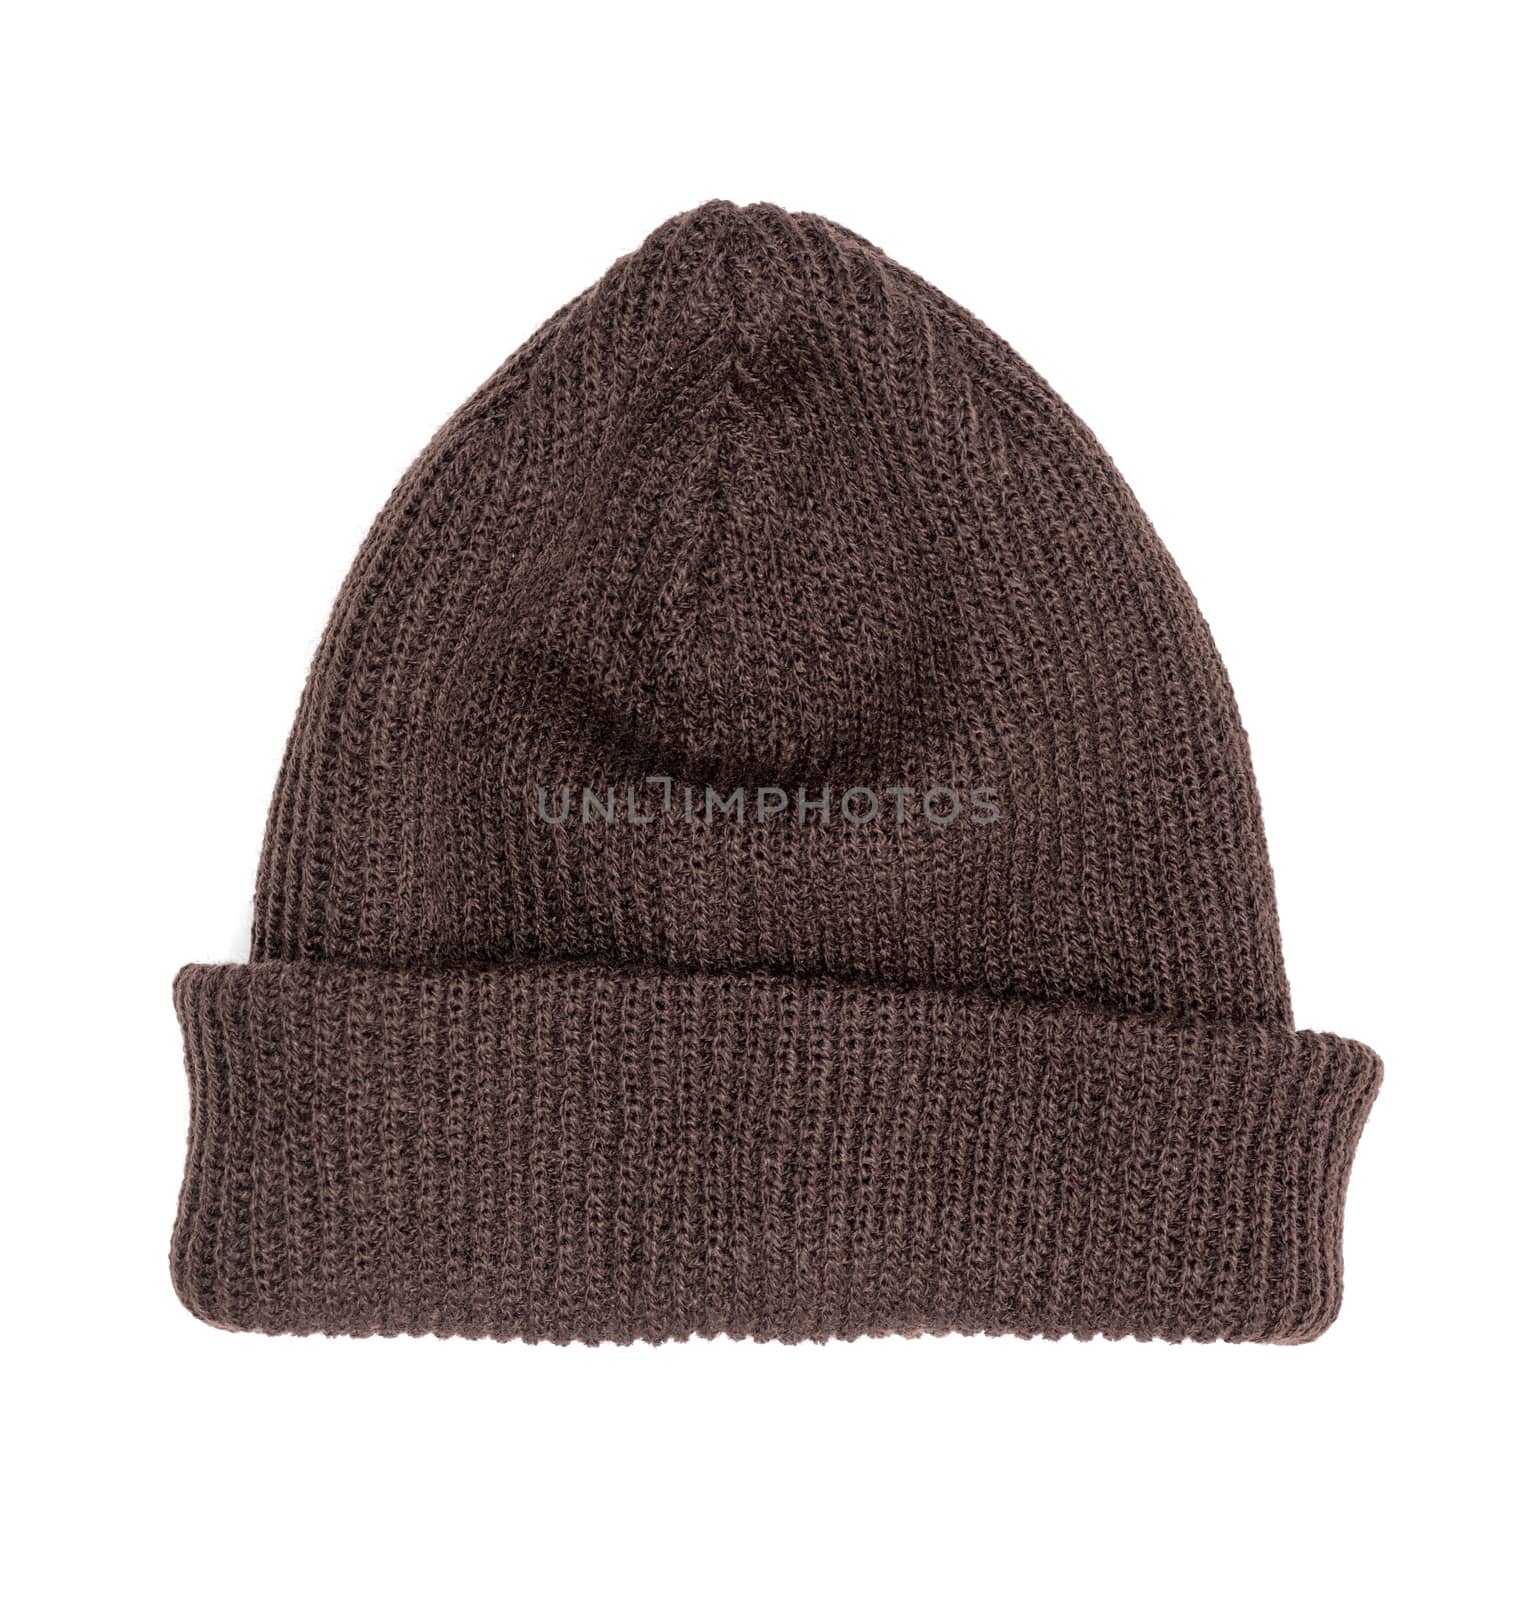 brown knitted hat isolated on white background